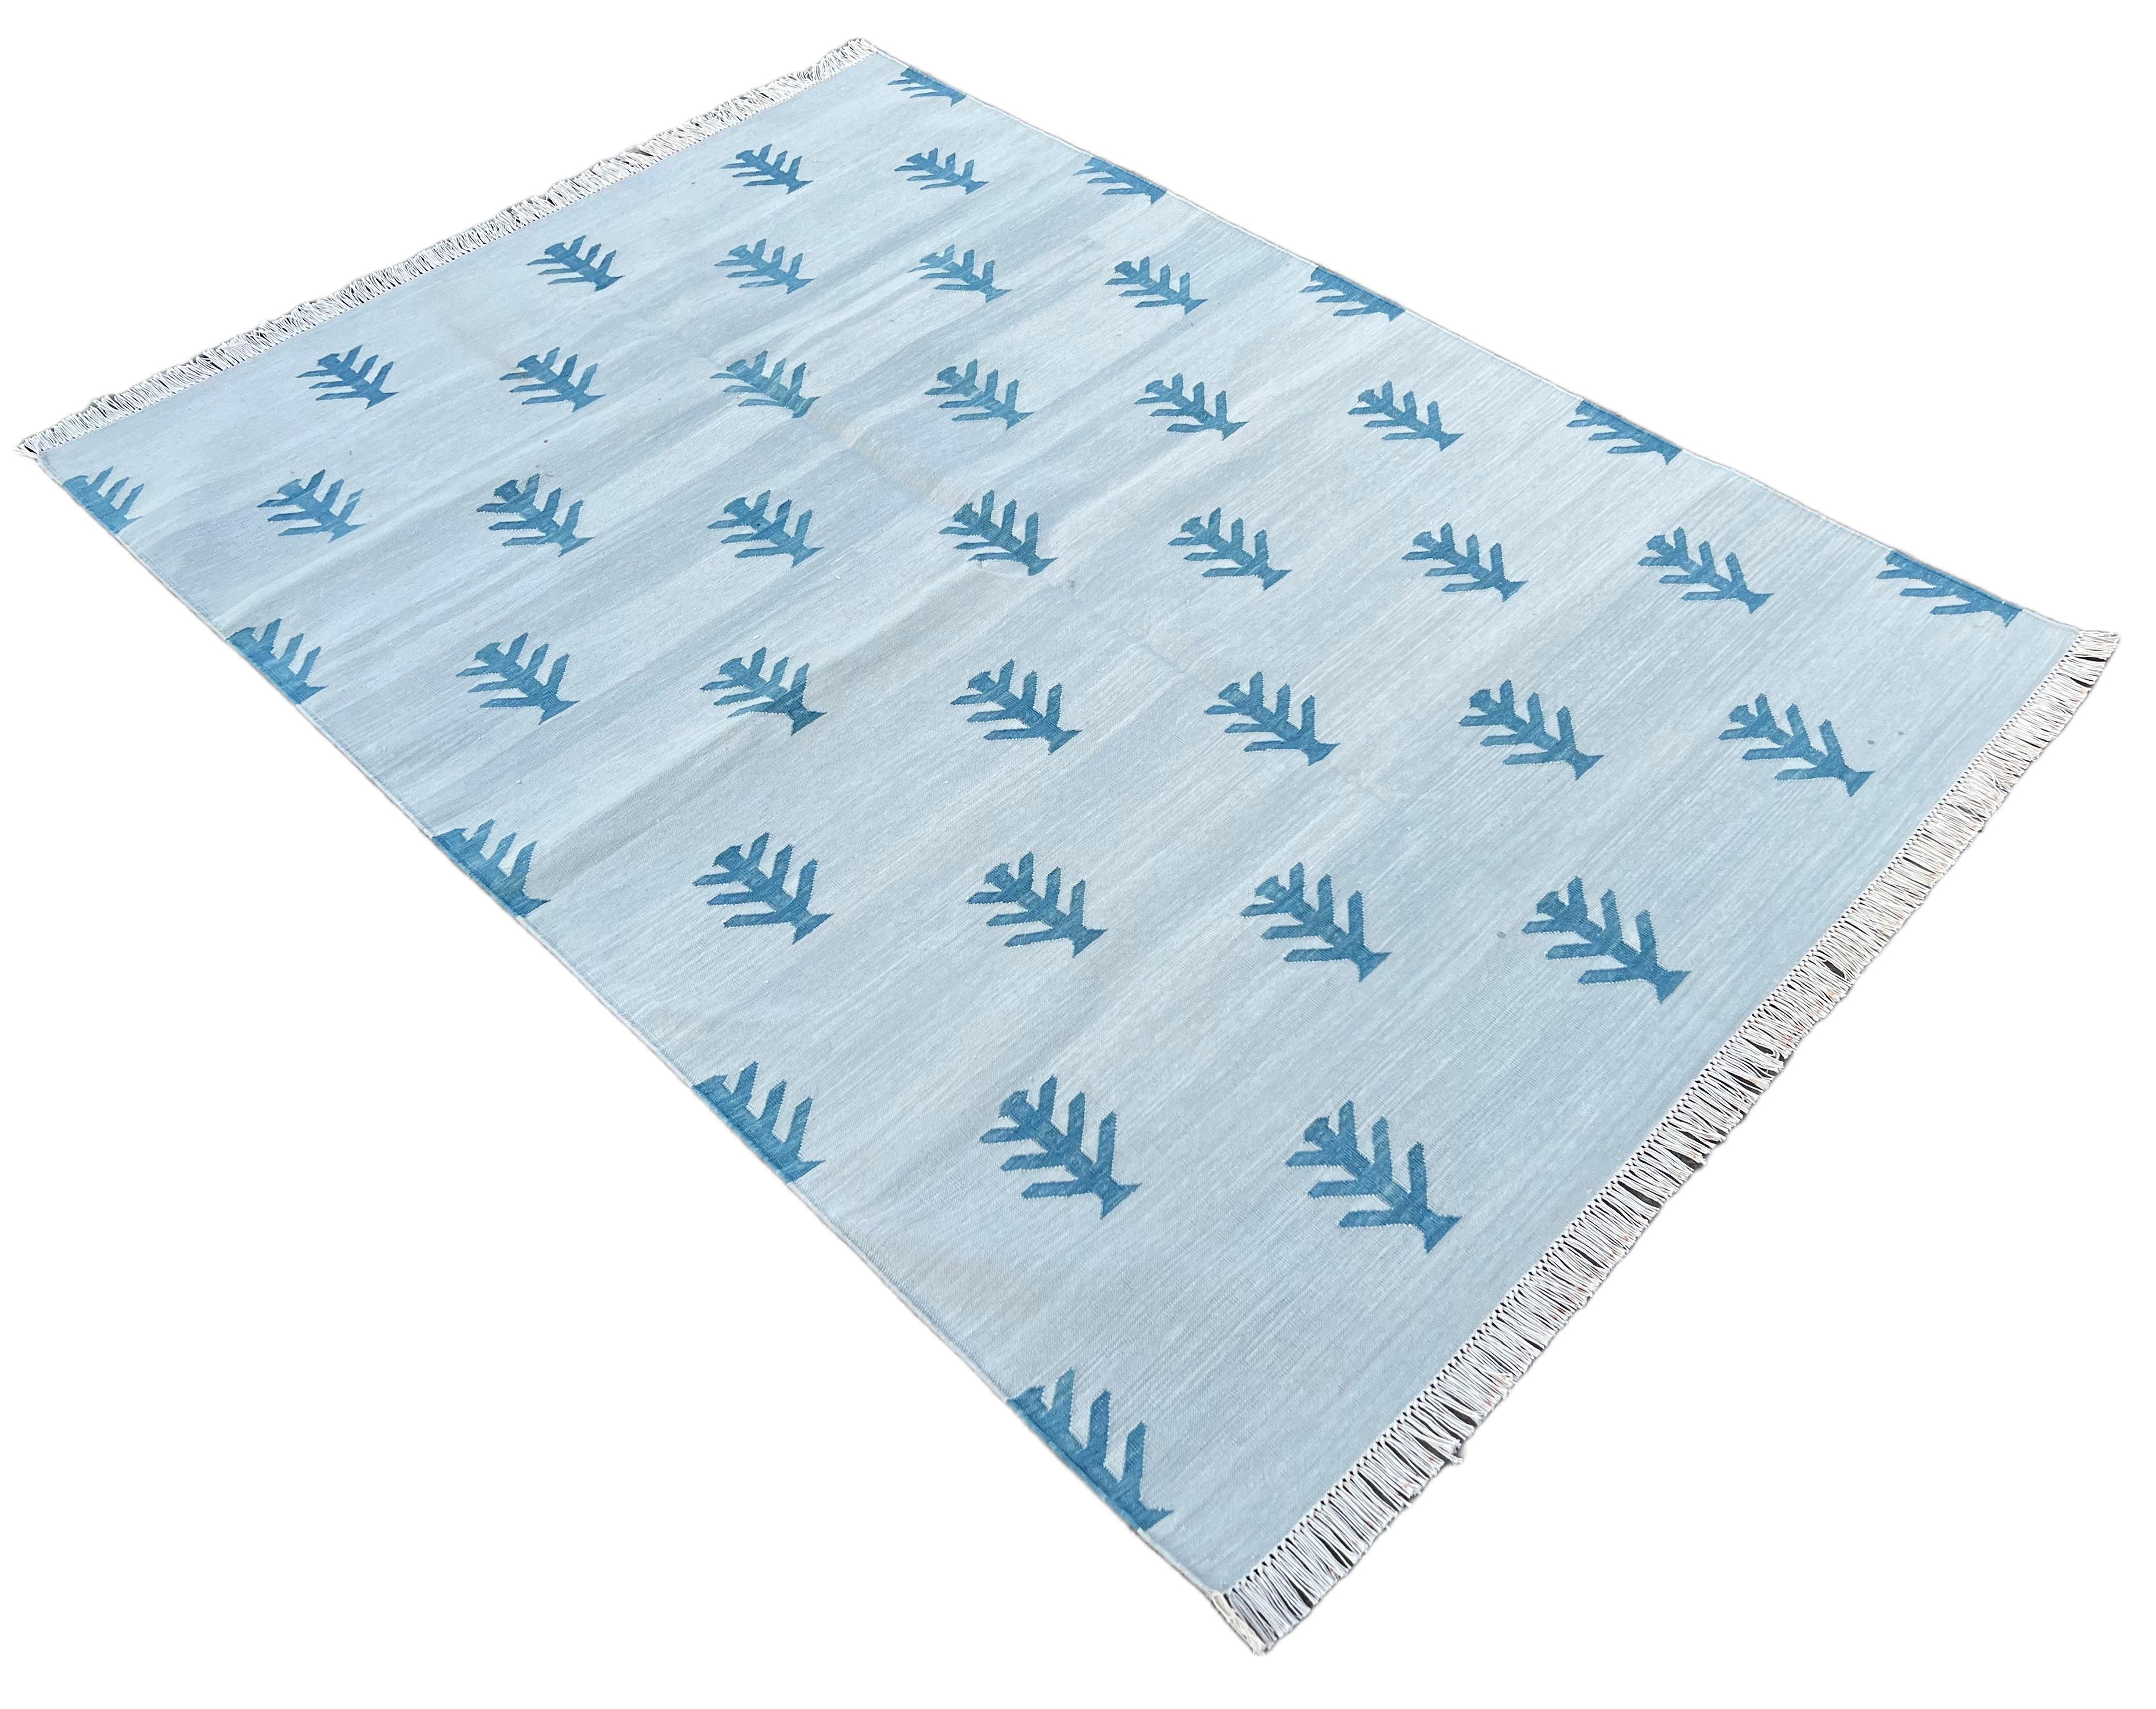 Cotton Vegetable Dyed Reversible Grey And Teal Blue Tree Patterned Indian Rug - 4'x6'
These special flat-weave dhurries are hand-woven with 15 ply 100% cotton yarn. Due to the special manufacturing techniques used to create our rugs, the size and